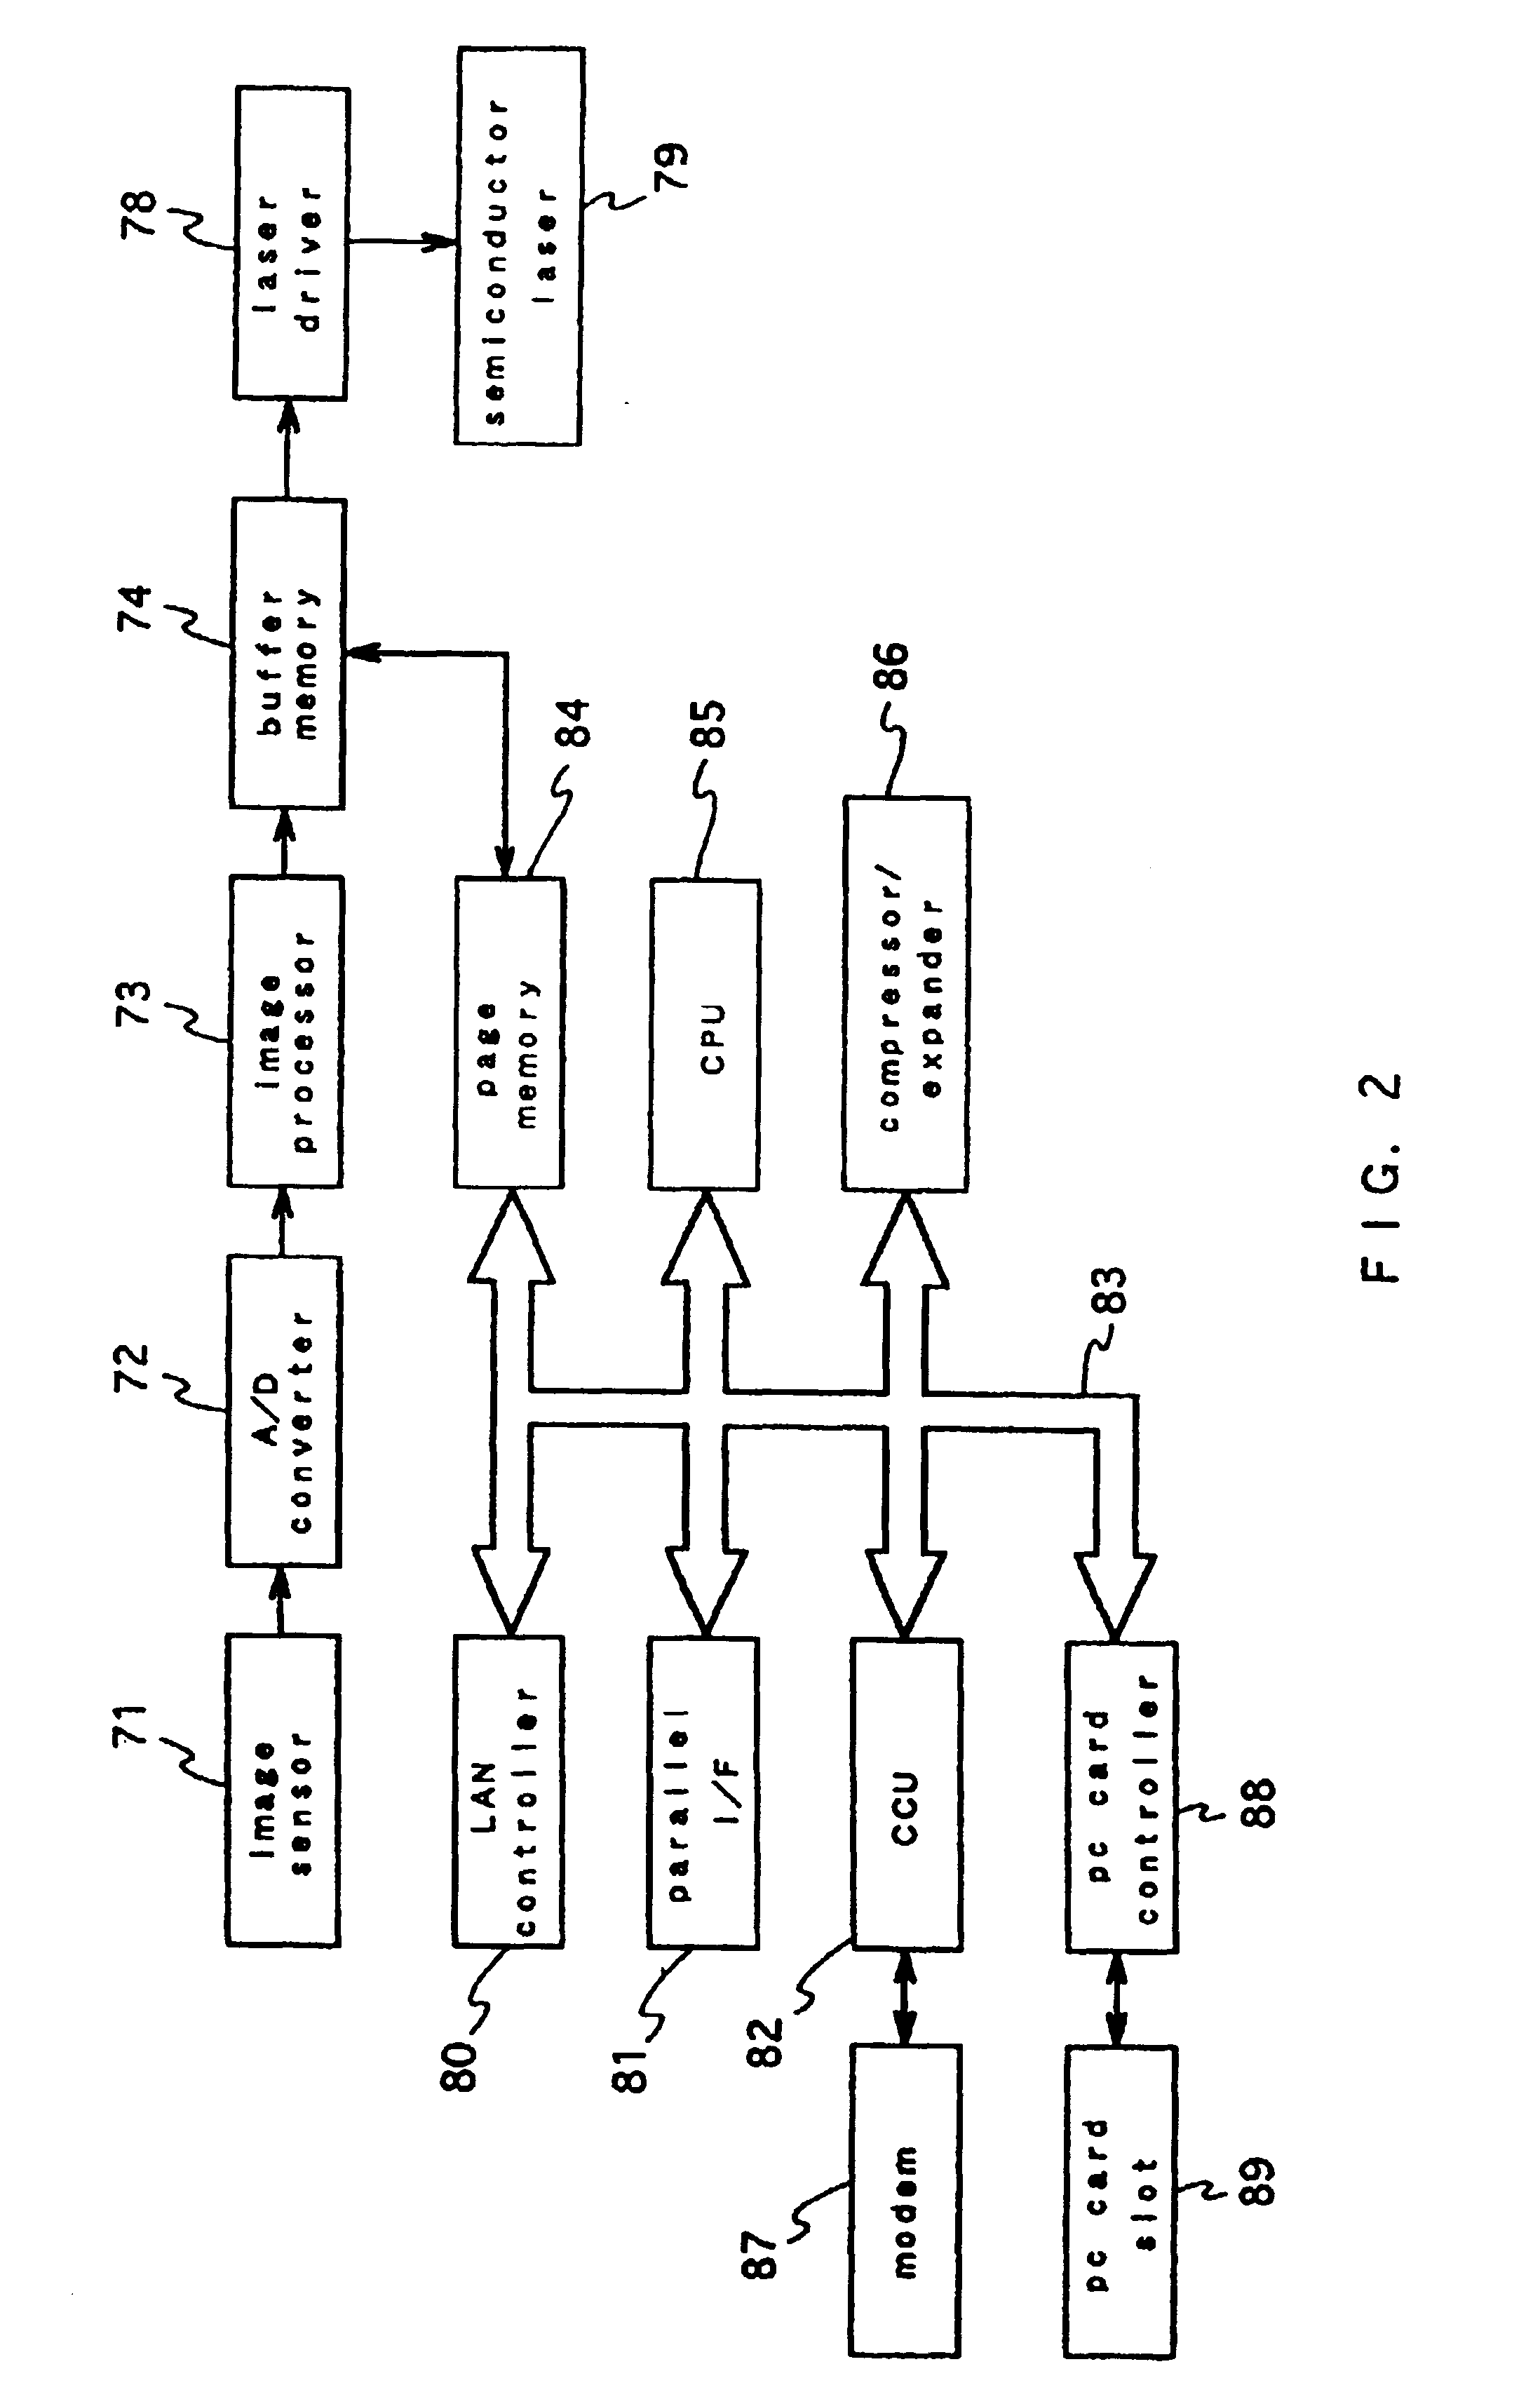 Offline print method using a printer apparatus and an external apparatus for printing out image data on a removable medium